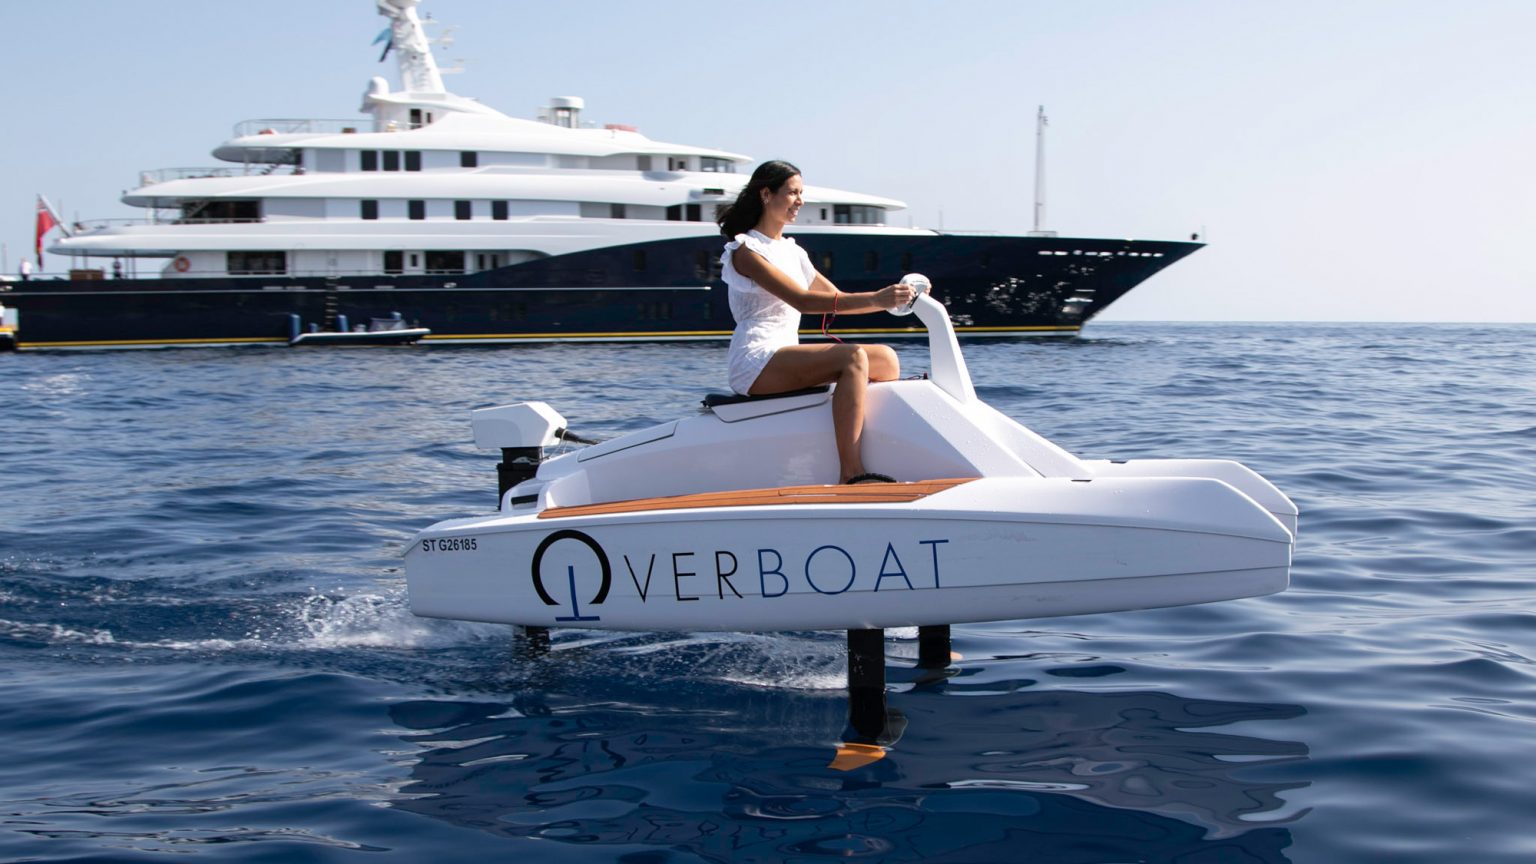 Is this foiling jetski the future of personal watercraft?